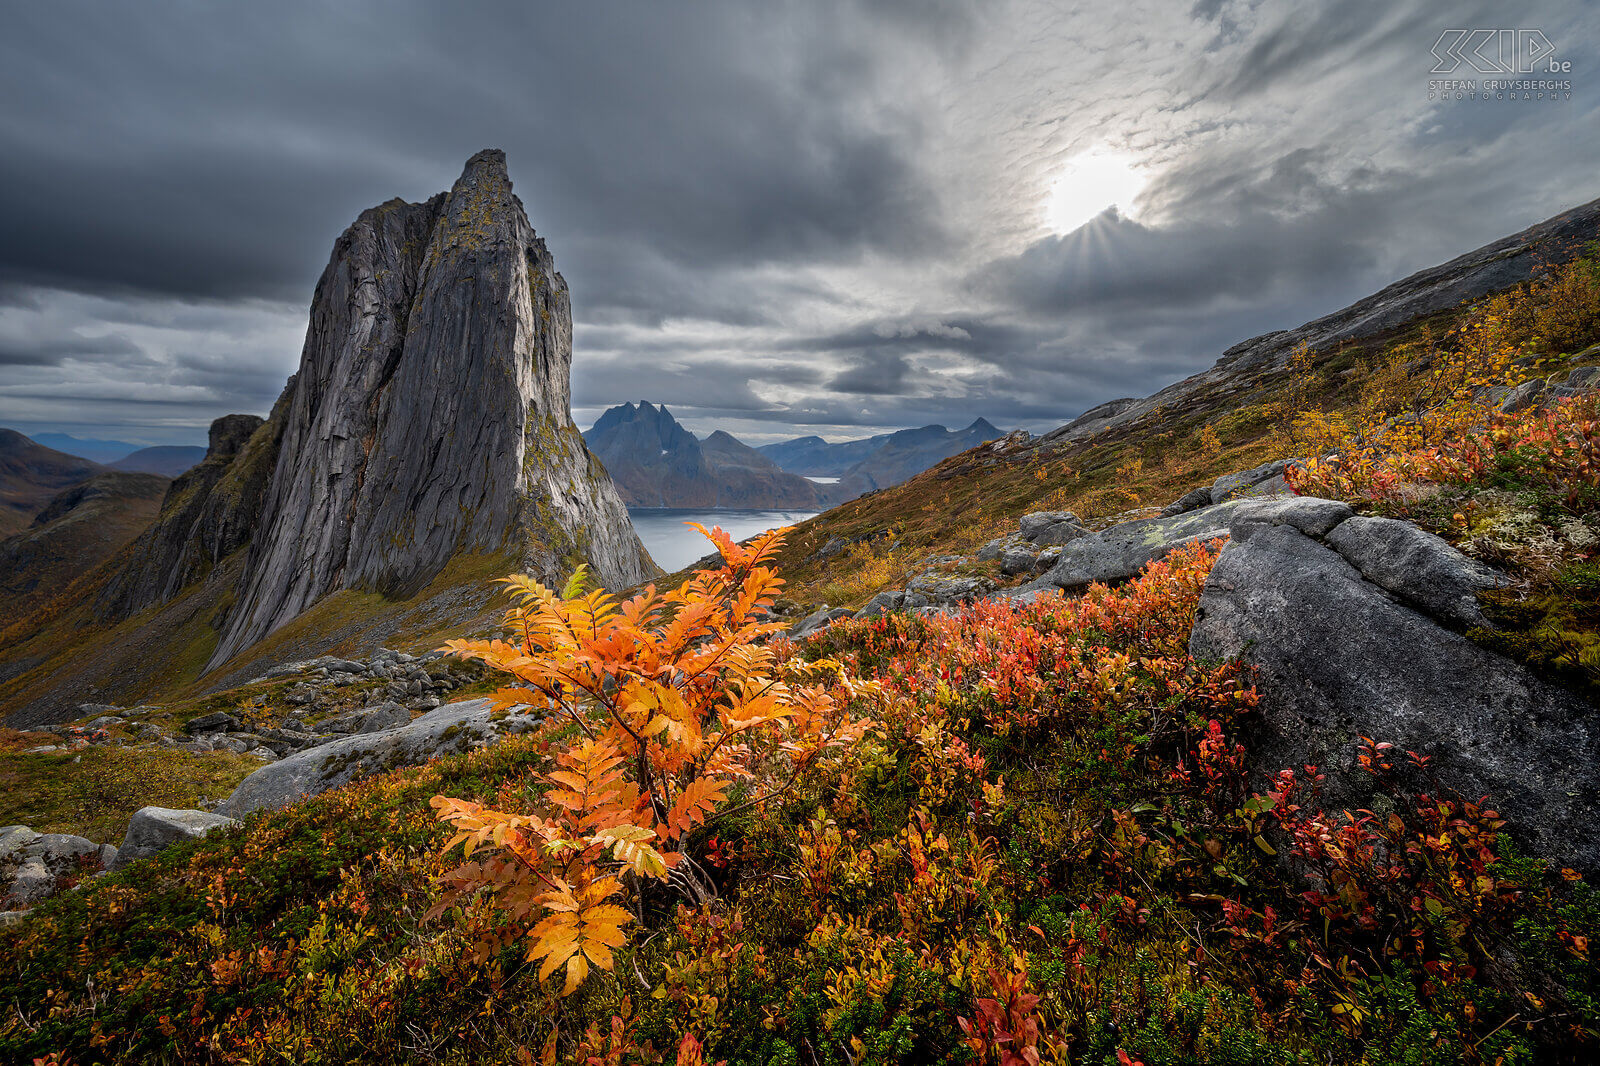 Senja - Segla The Segla, the most iconic rock formation of the island Senja. The mountain peak is 639 meters above the ocean below. The view is really stunning. Stefan Cruysberghs